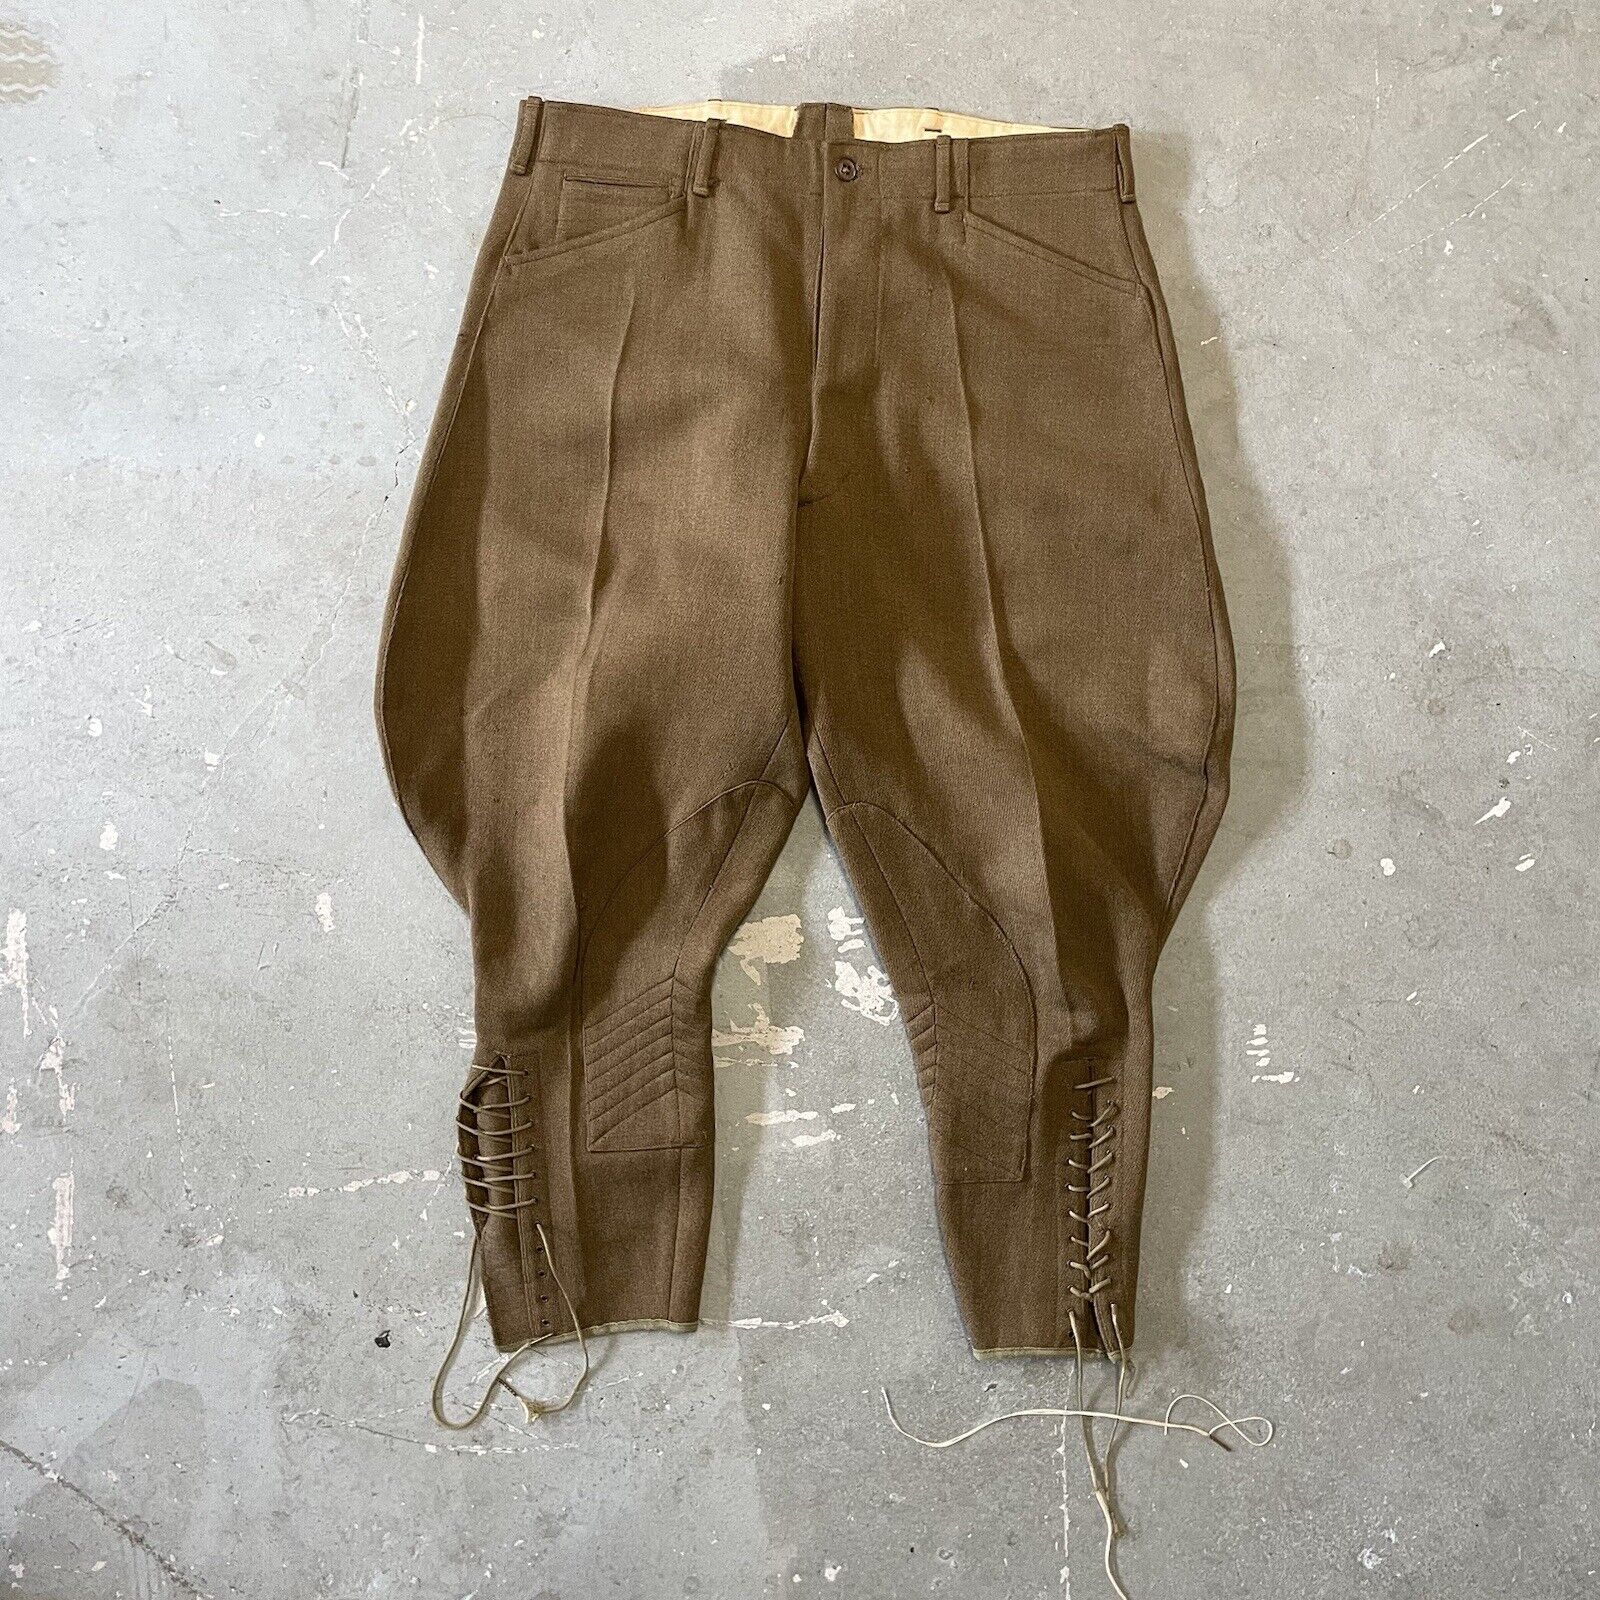 WW1 Canadian Army CEF Riding Breeches Pants Trousers Size 36 Waist 1914 Worn